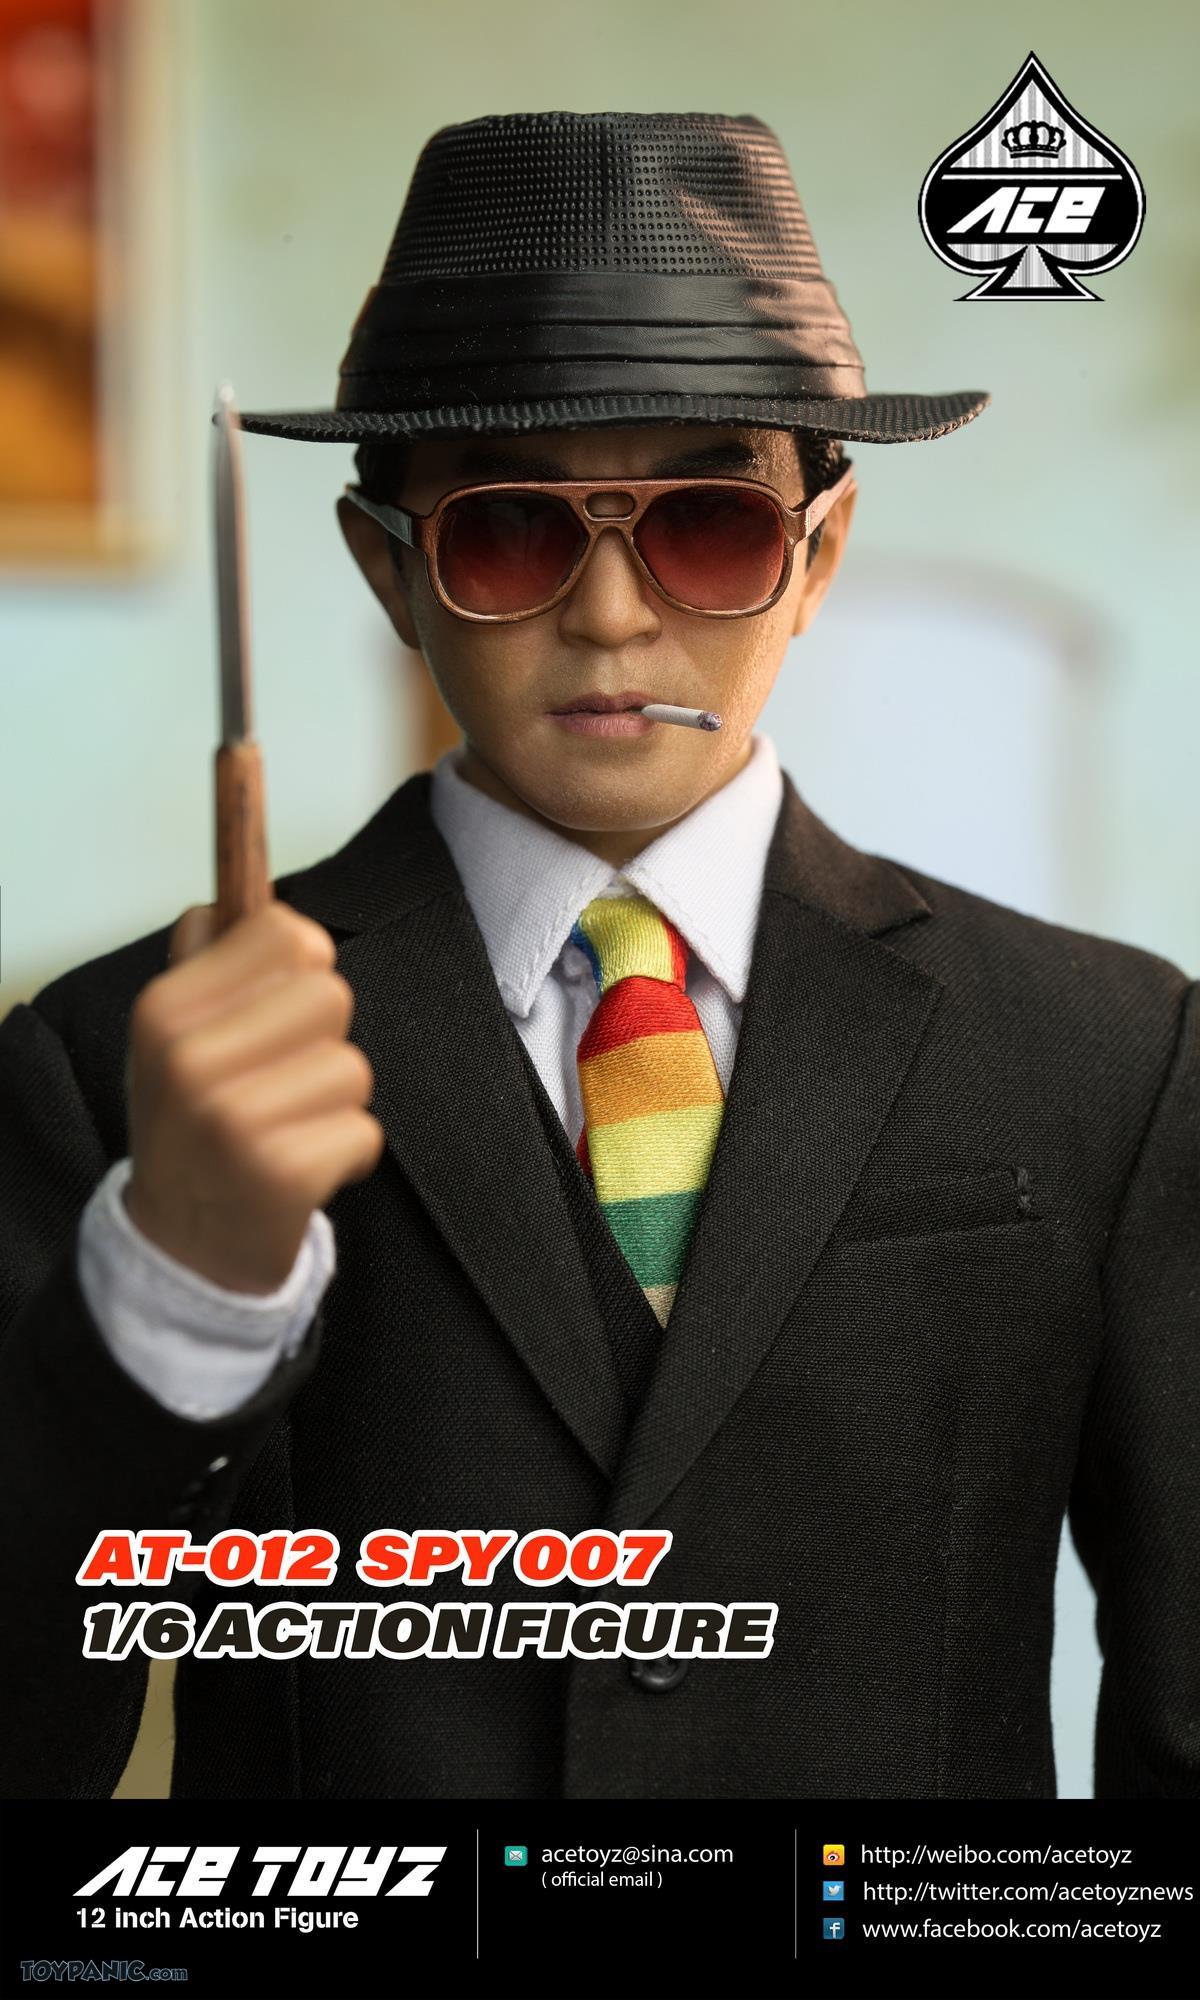 NEW PRODUCT: 1/6 scale Spy 007 Action Figure from Acetoyz  3011202210227AM_136541